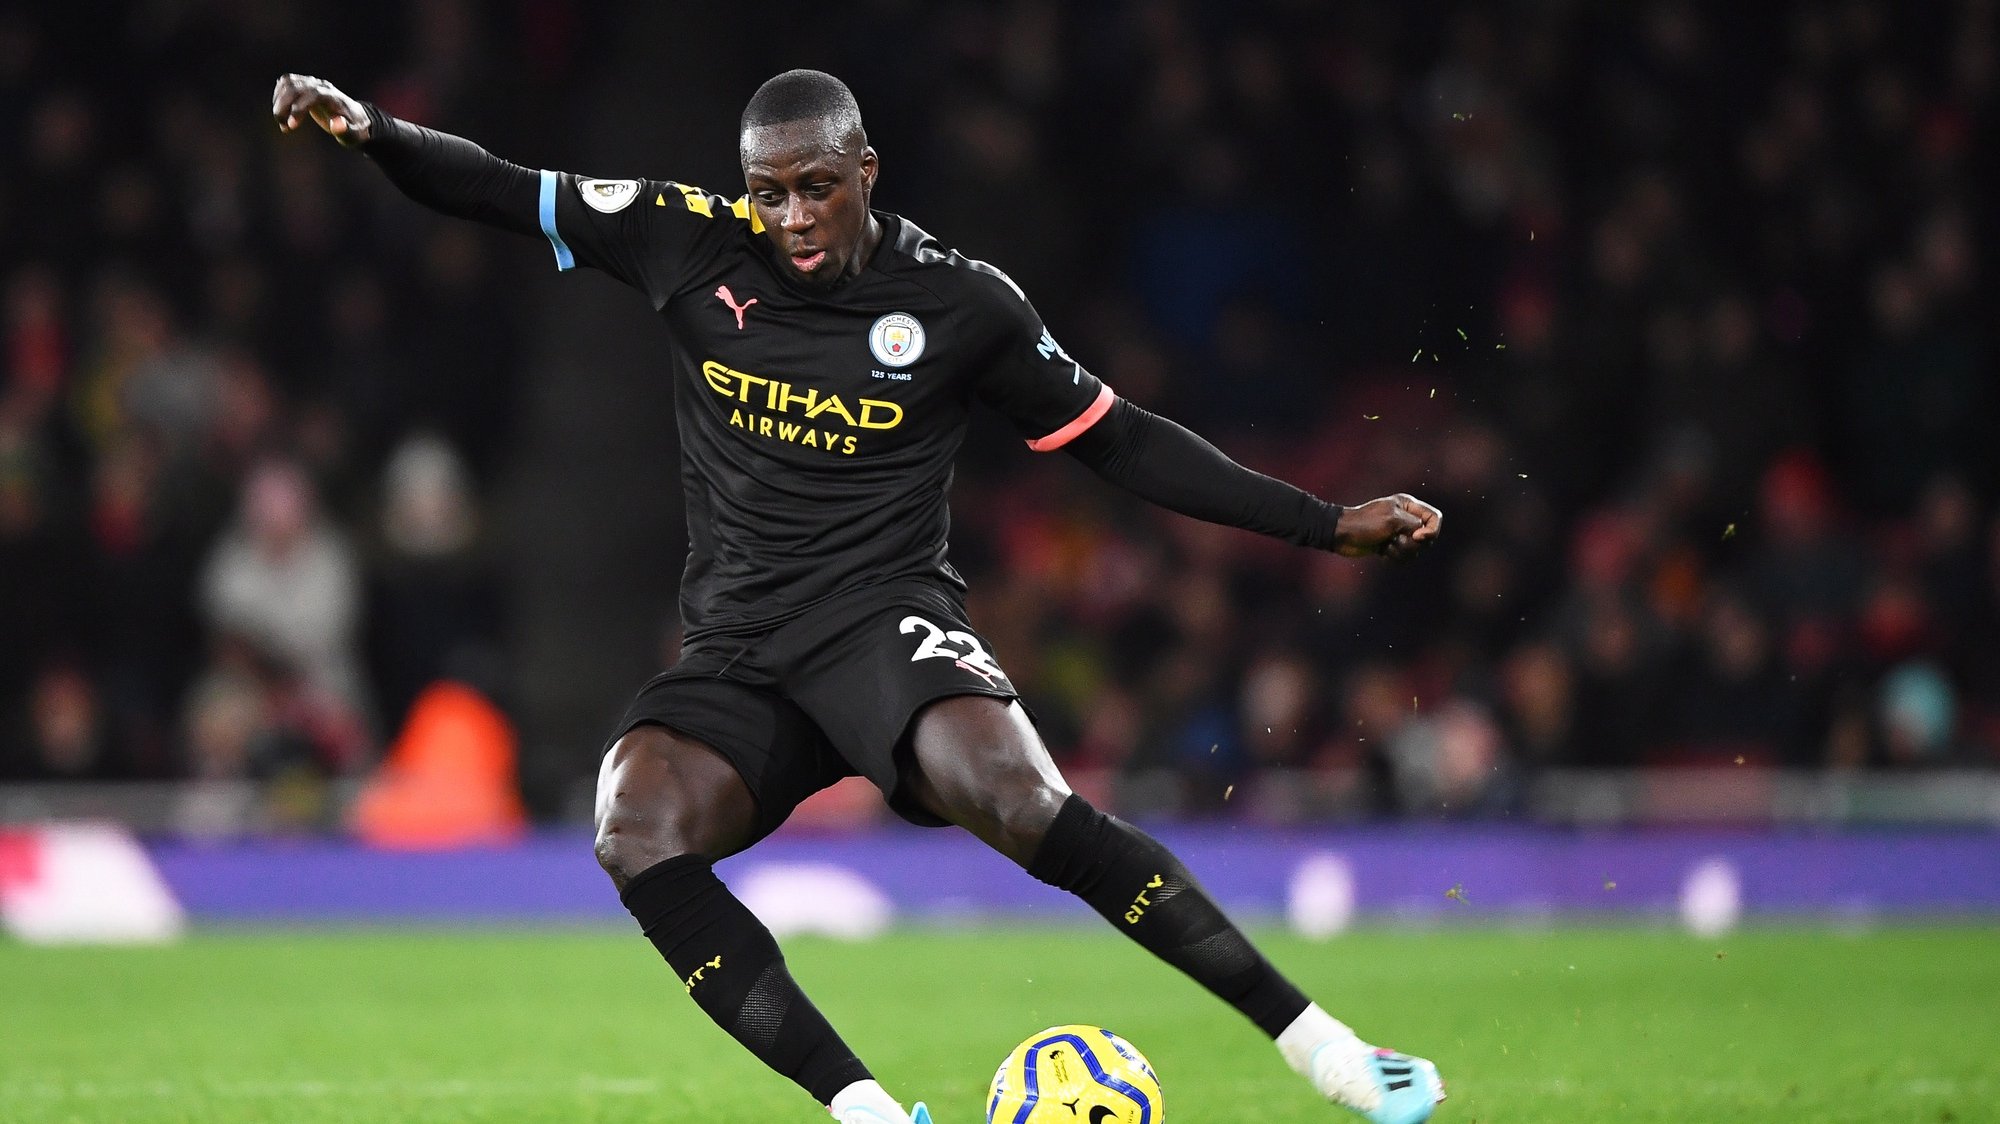 epa08074257 Manchester City&#039;s Benjamin Mendy in action during the English Premier League soccer match between Arsenal FC and Manchester City in London, Britain, 15 December 2019.  EPA/FACUNDO ARRIZABALAGA EDITORIAL USE ONLY.  No use with unauthorized audio, video, data, fixture lists, club/league logos or &#039;live&#039; services. Online in-match use limited to 120 images, no video emulation. No use in betting, games or single club/league/player publications.